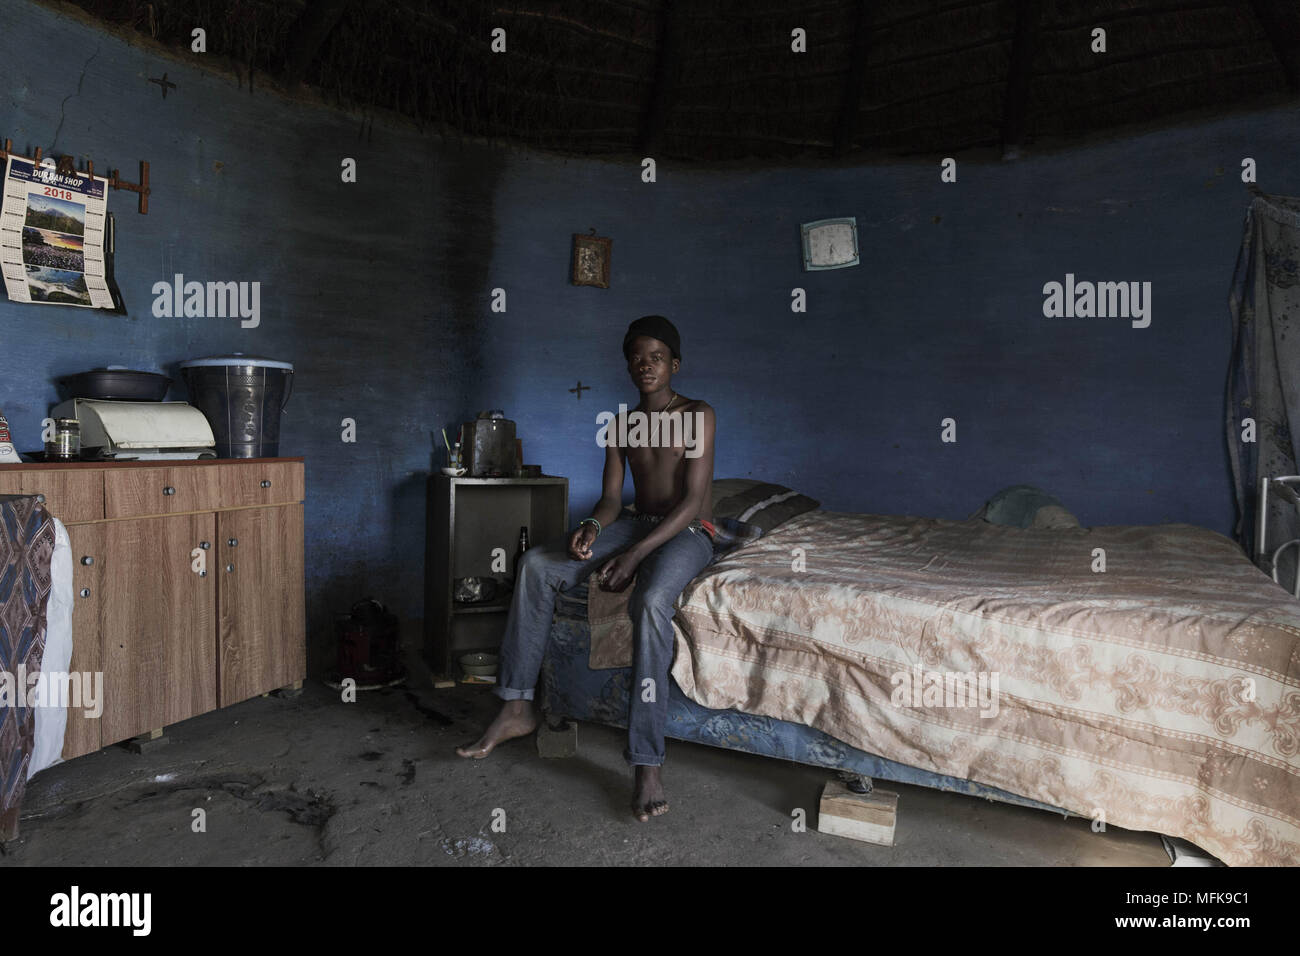 January 12, 2018 - Matatiele, Eastern Cape, South Africa - Luis, 14, sits on the bed in one of his family's mud houses, which he shares with his older brother and father. The blue round shaped house serves as a sleeping room, community area and as a kitchen. (Credit Image: © Stefan Kleinowitz via ZUMA Wire) Stock Photo